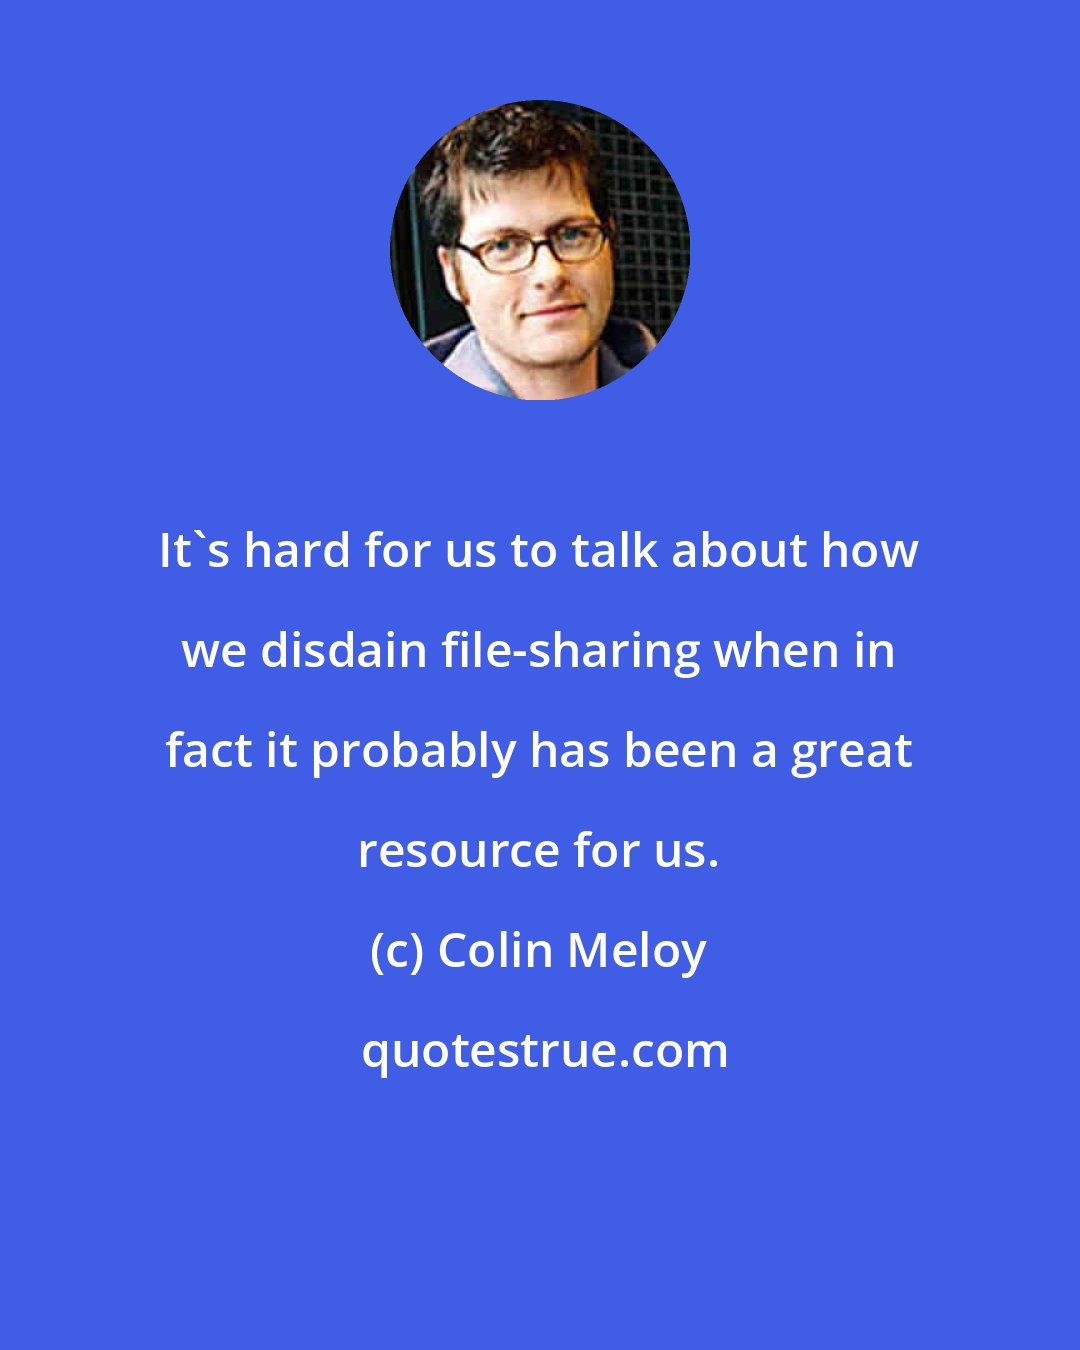 Colin Meloy: It's hard for us to talk about how we disdain file-sharing when in fact it probably has been a great resource for us.